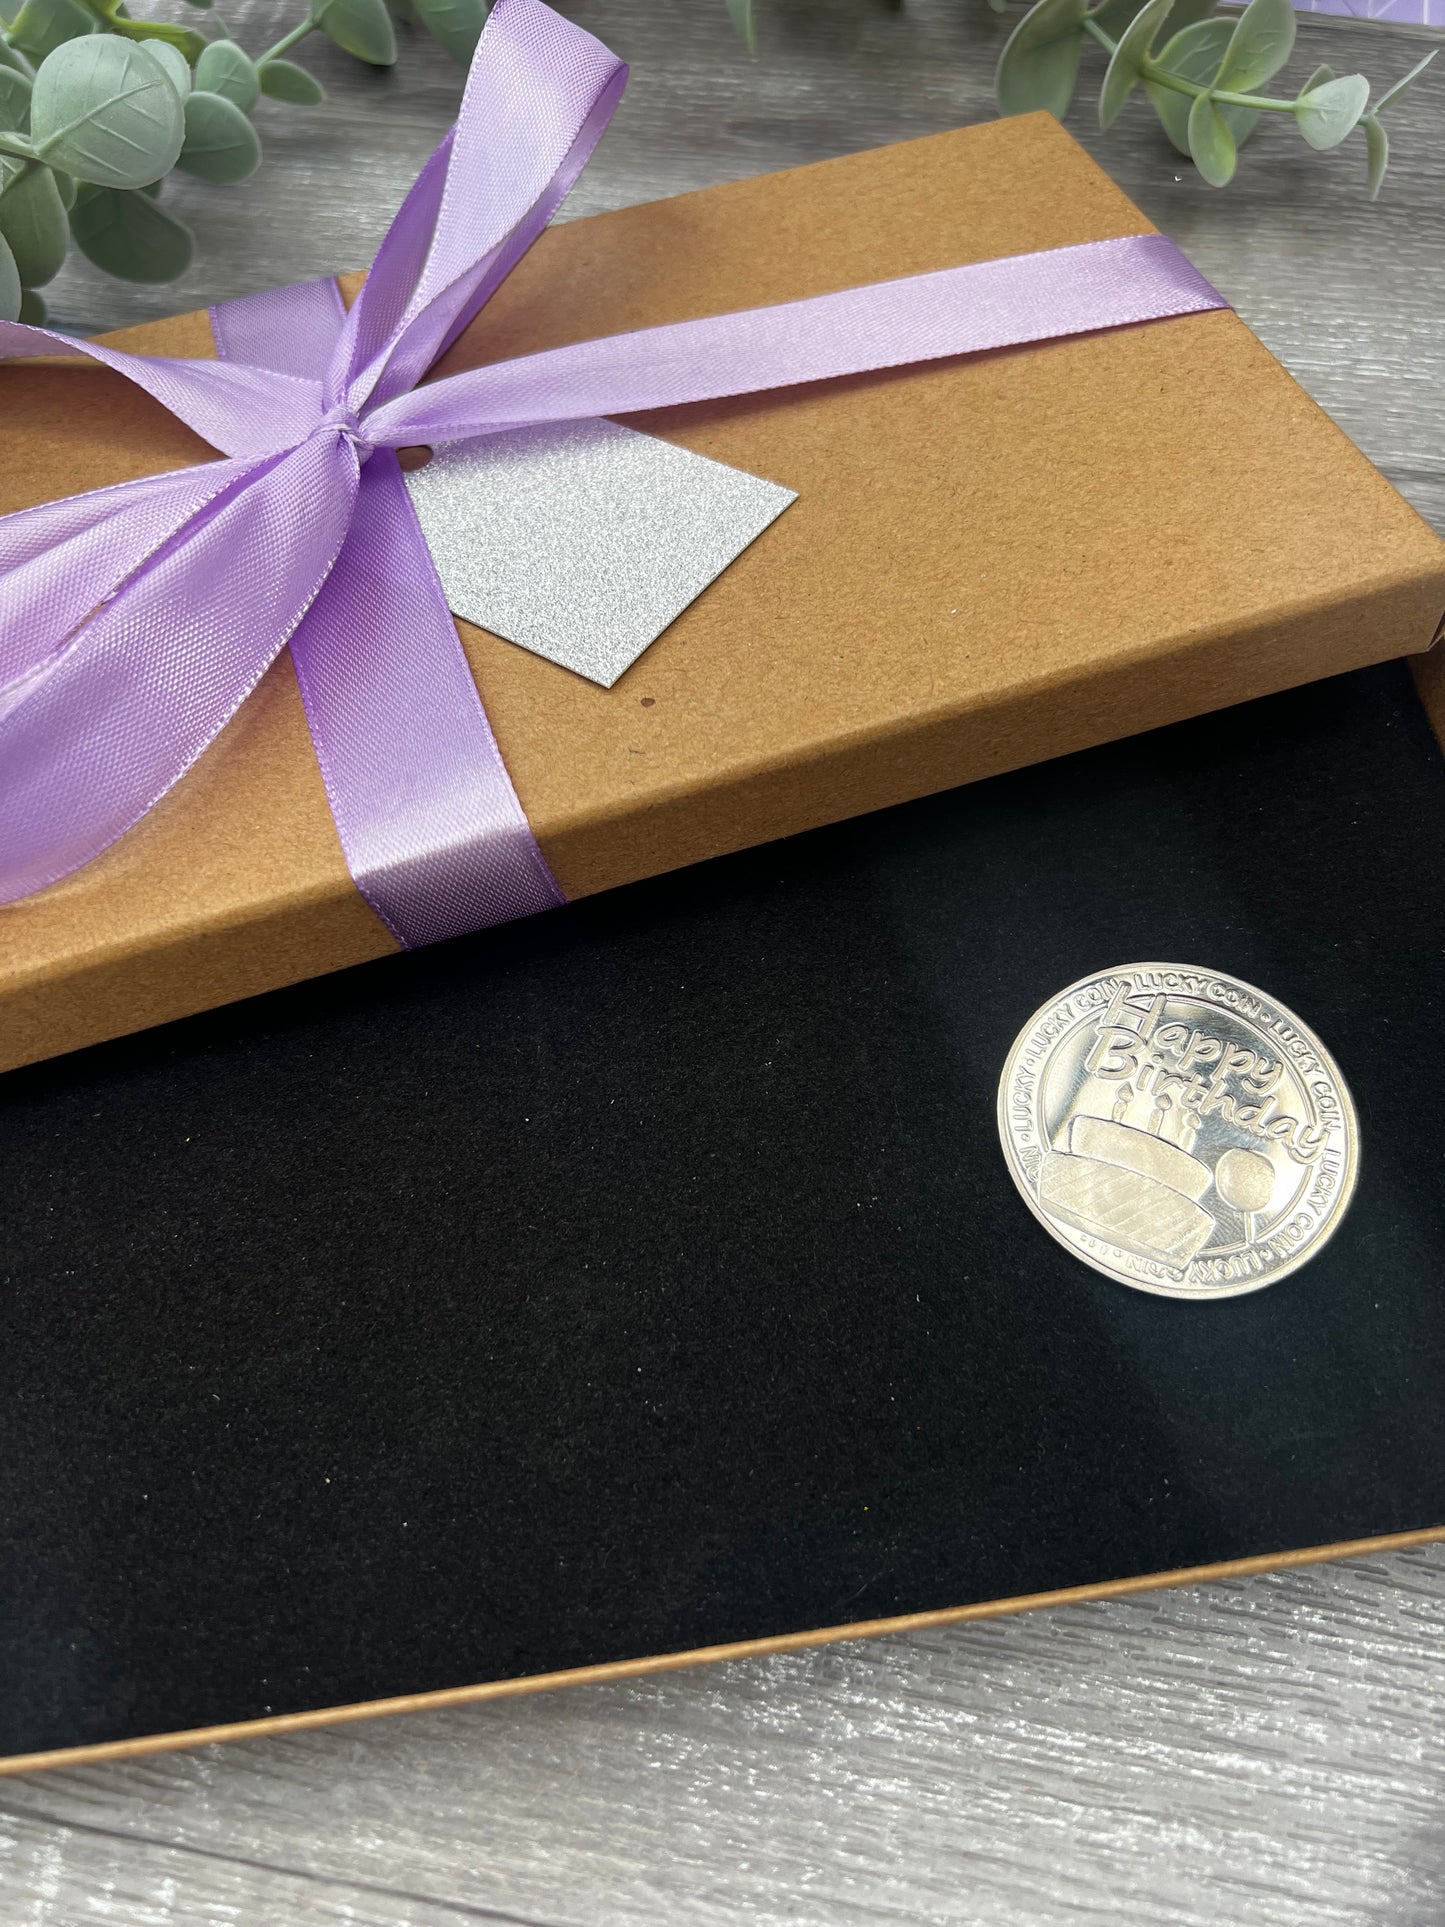 Surprise holiday gifting set including, scratch card, box & birthday coin.